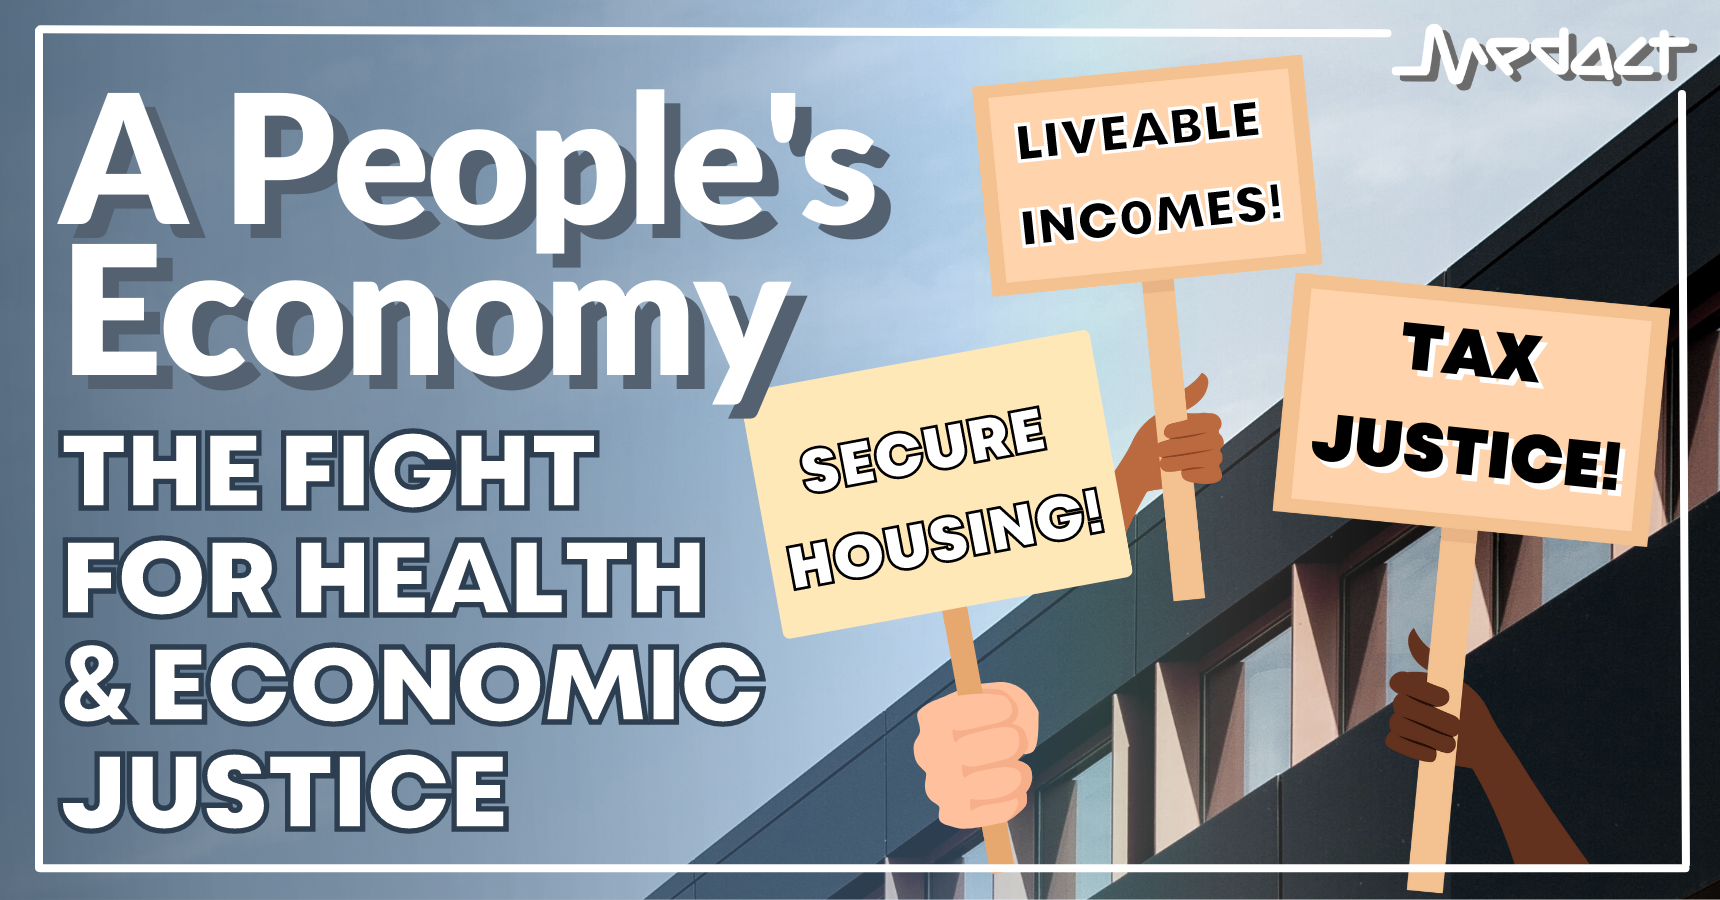 A People’s Economy: the fight for health and economic justice